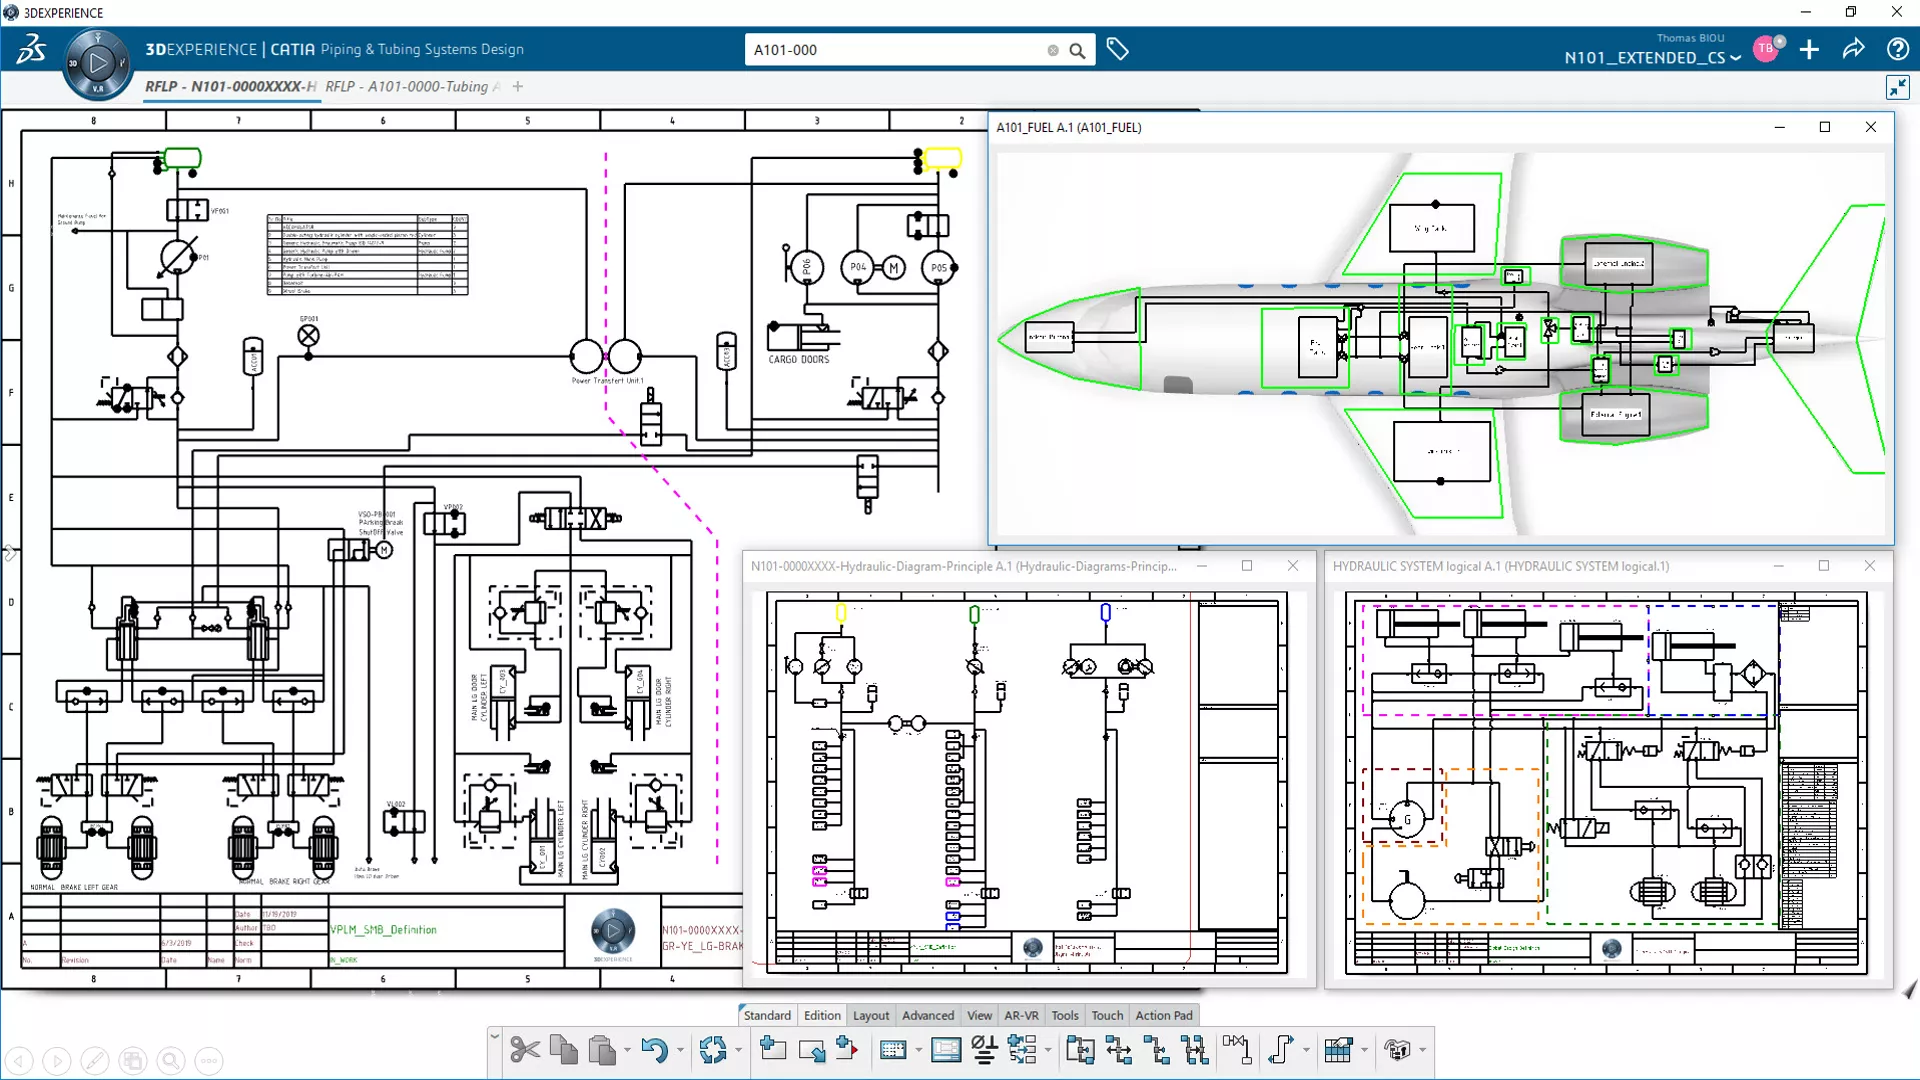 3DEXPERIENCE CATIA - Systems Schematic Engineer